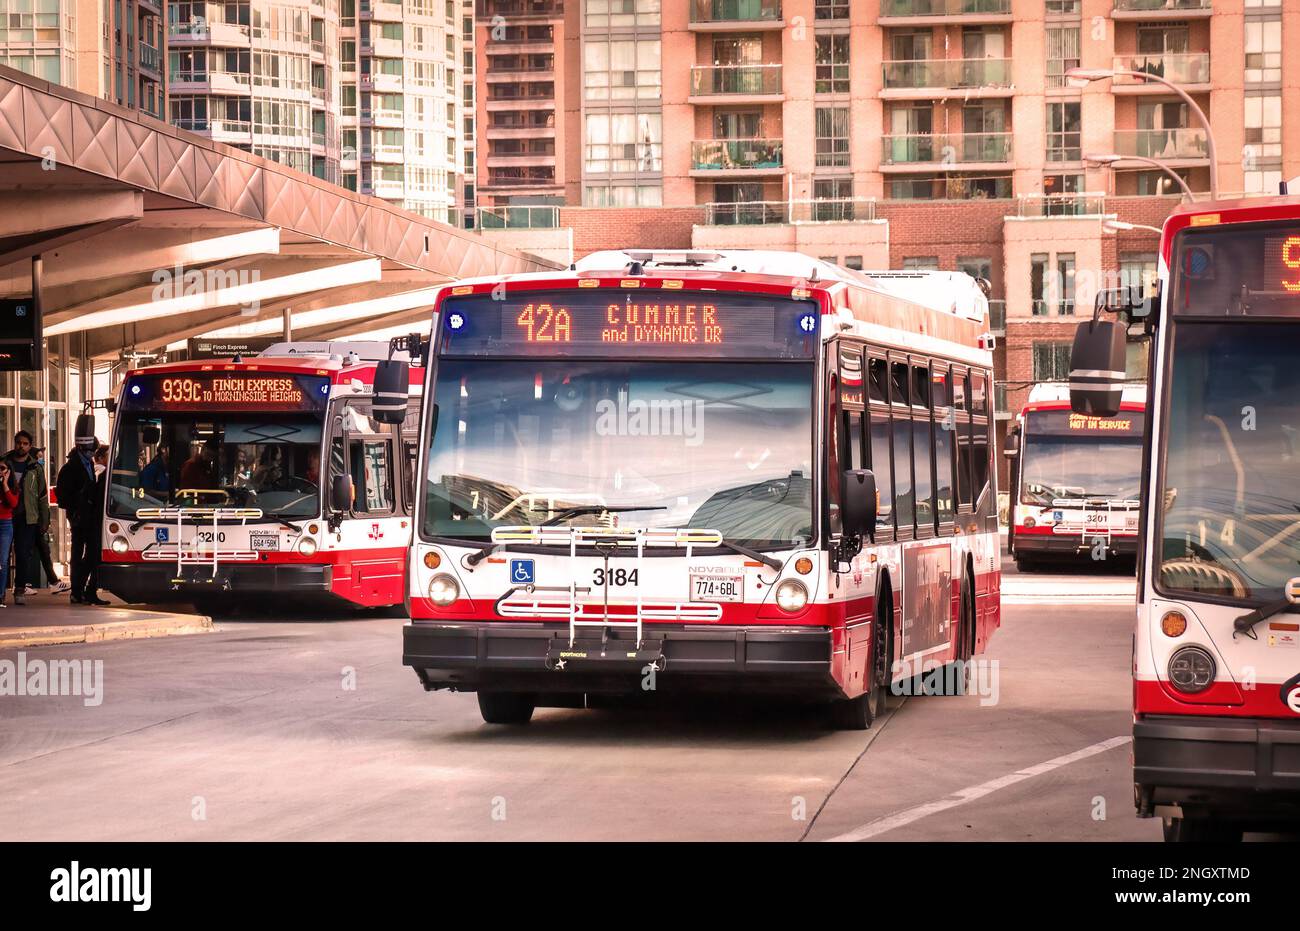 Toronto, Ontario, Canada - 10 03 2022: NOVABUS buses owned by Toronto Transit Commission at Finch subway station bus terminal. Nova Bus is a Canadian Stock Photo